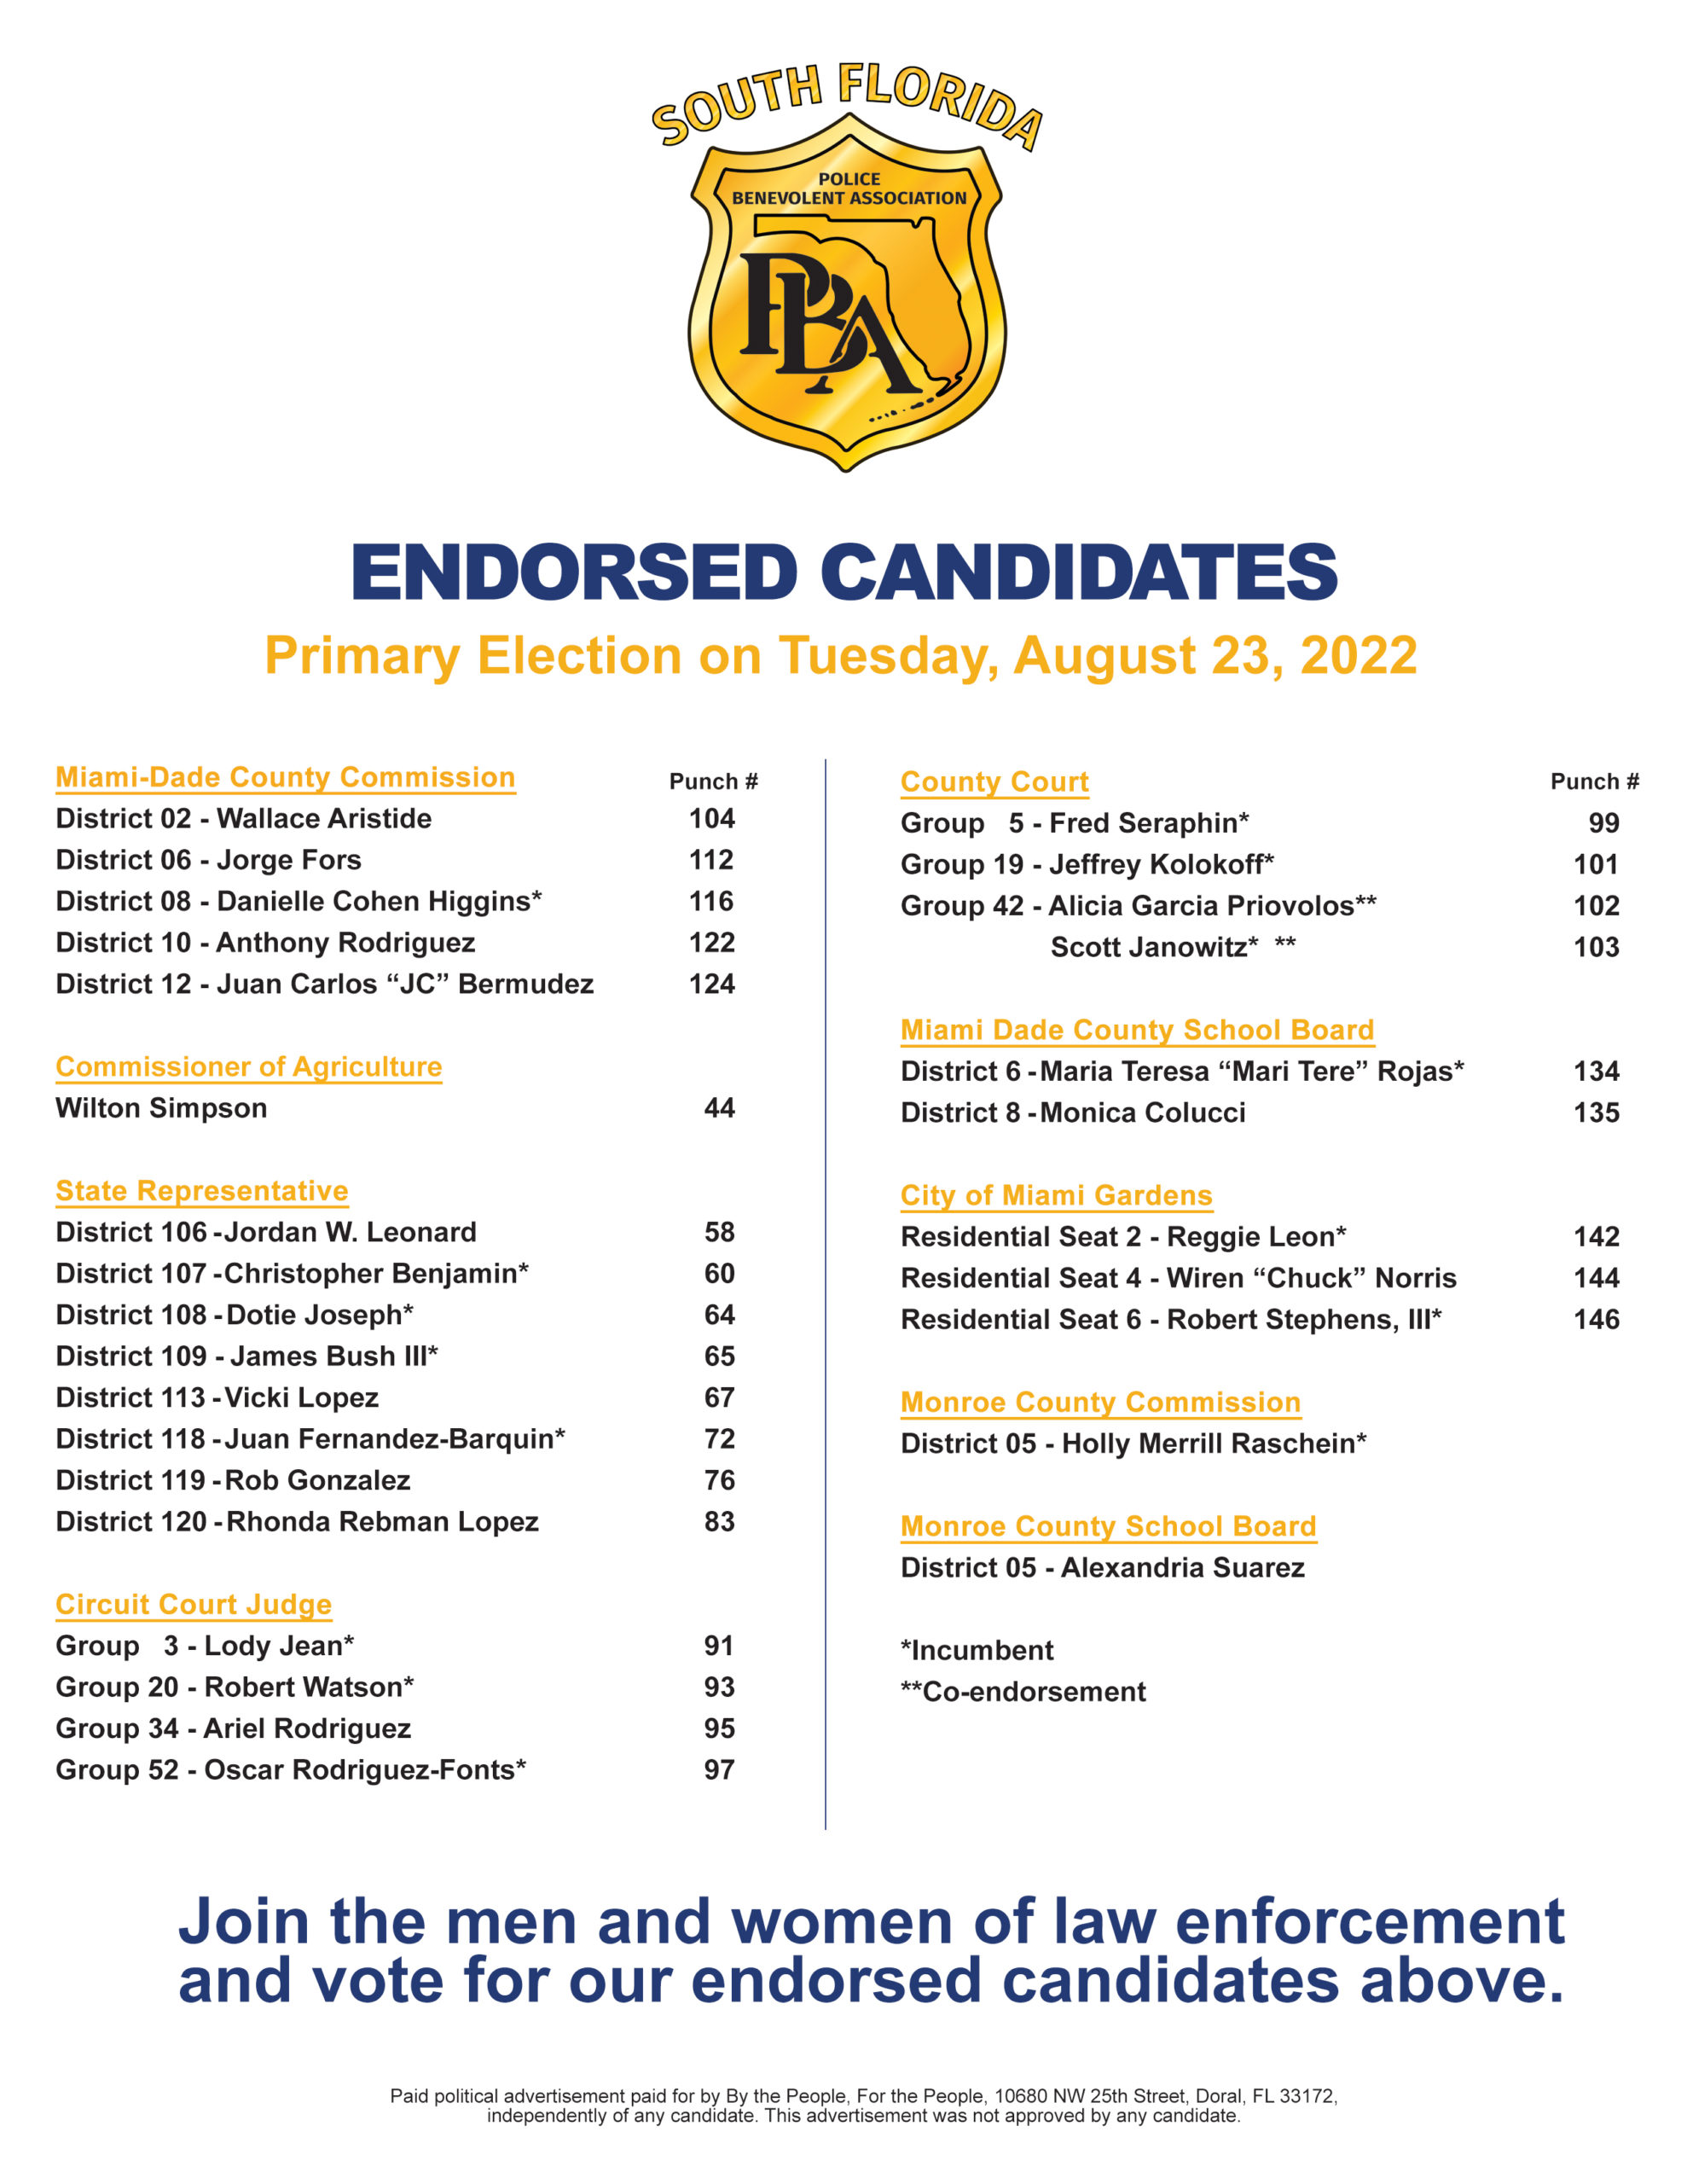 //dcpba.org/wp-content/uploads/2022/07/HEAT-FP-AD-SFPBA-Endorsements-Primary-Elections-scaled.jpg